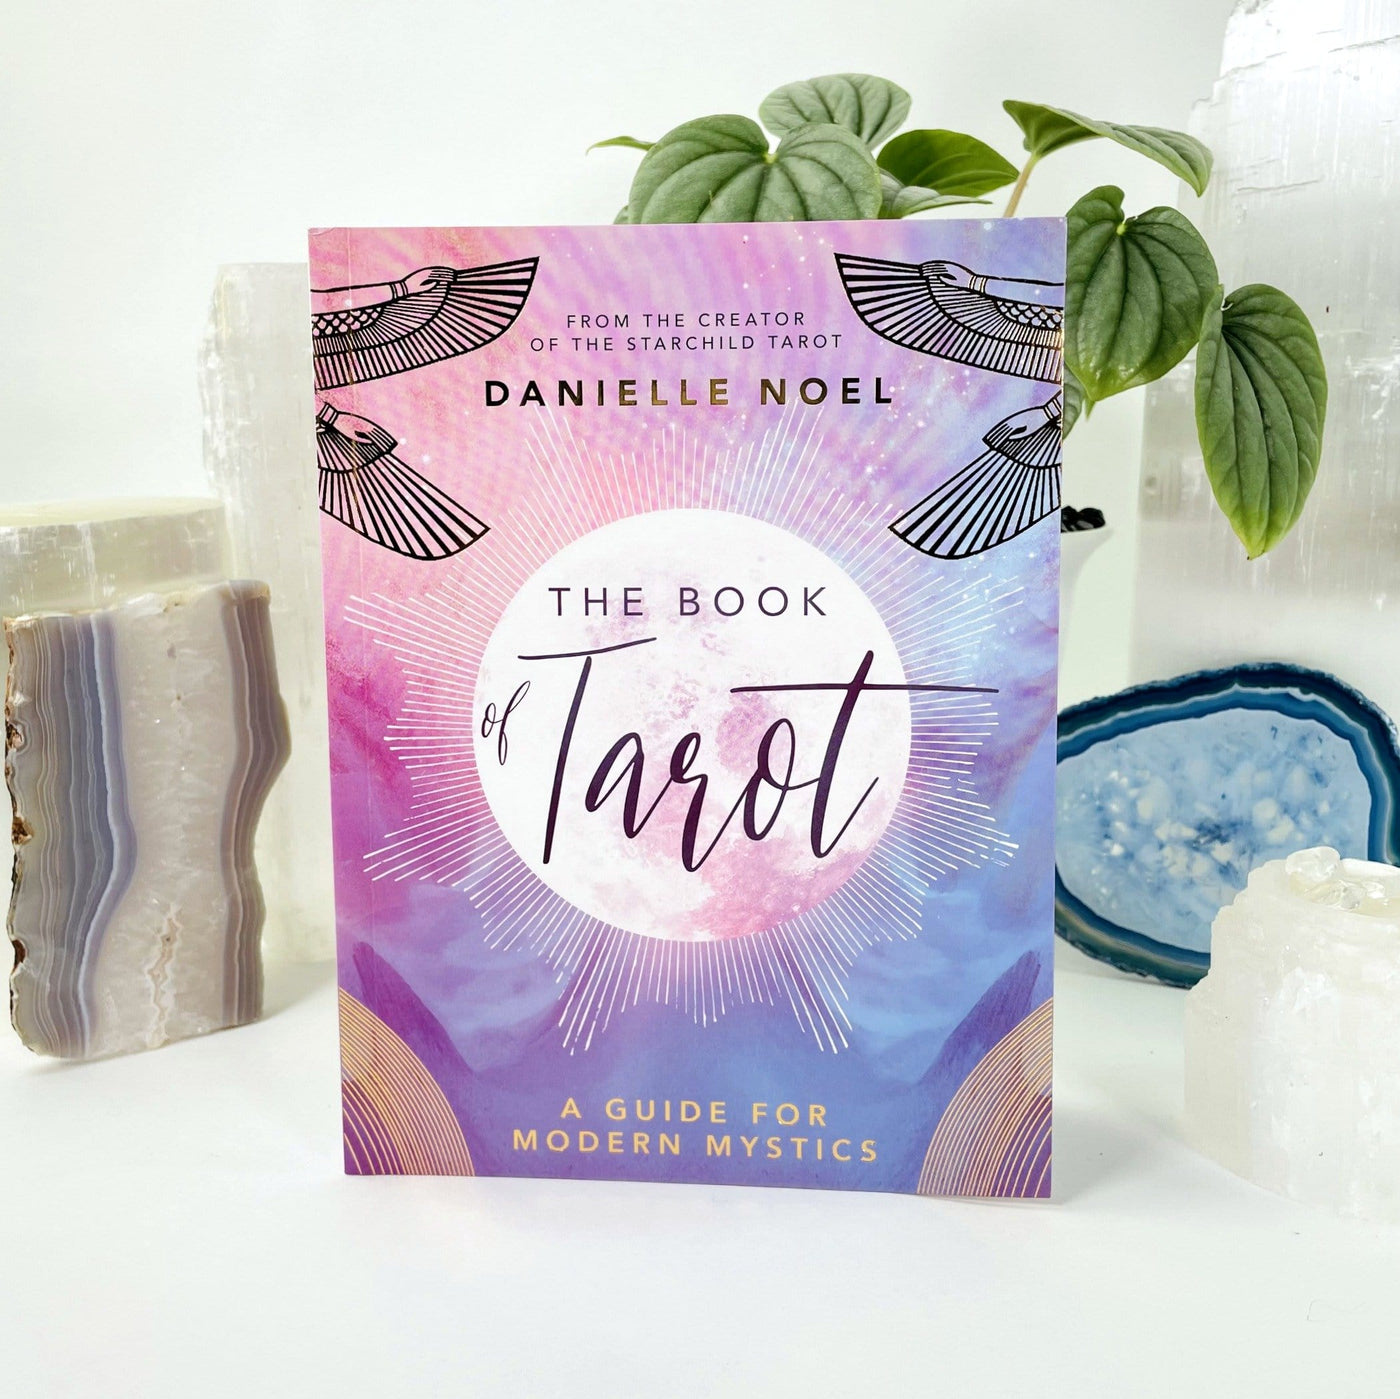 A Guide for Modern Mystics with The Book of Tarot by Danielle Noel